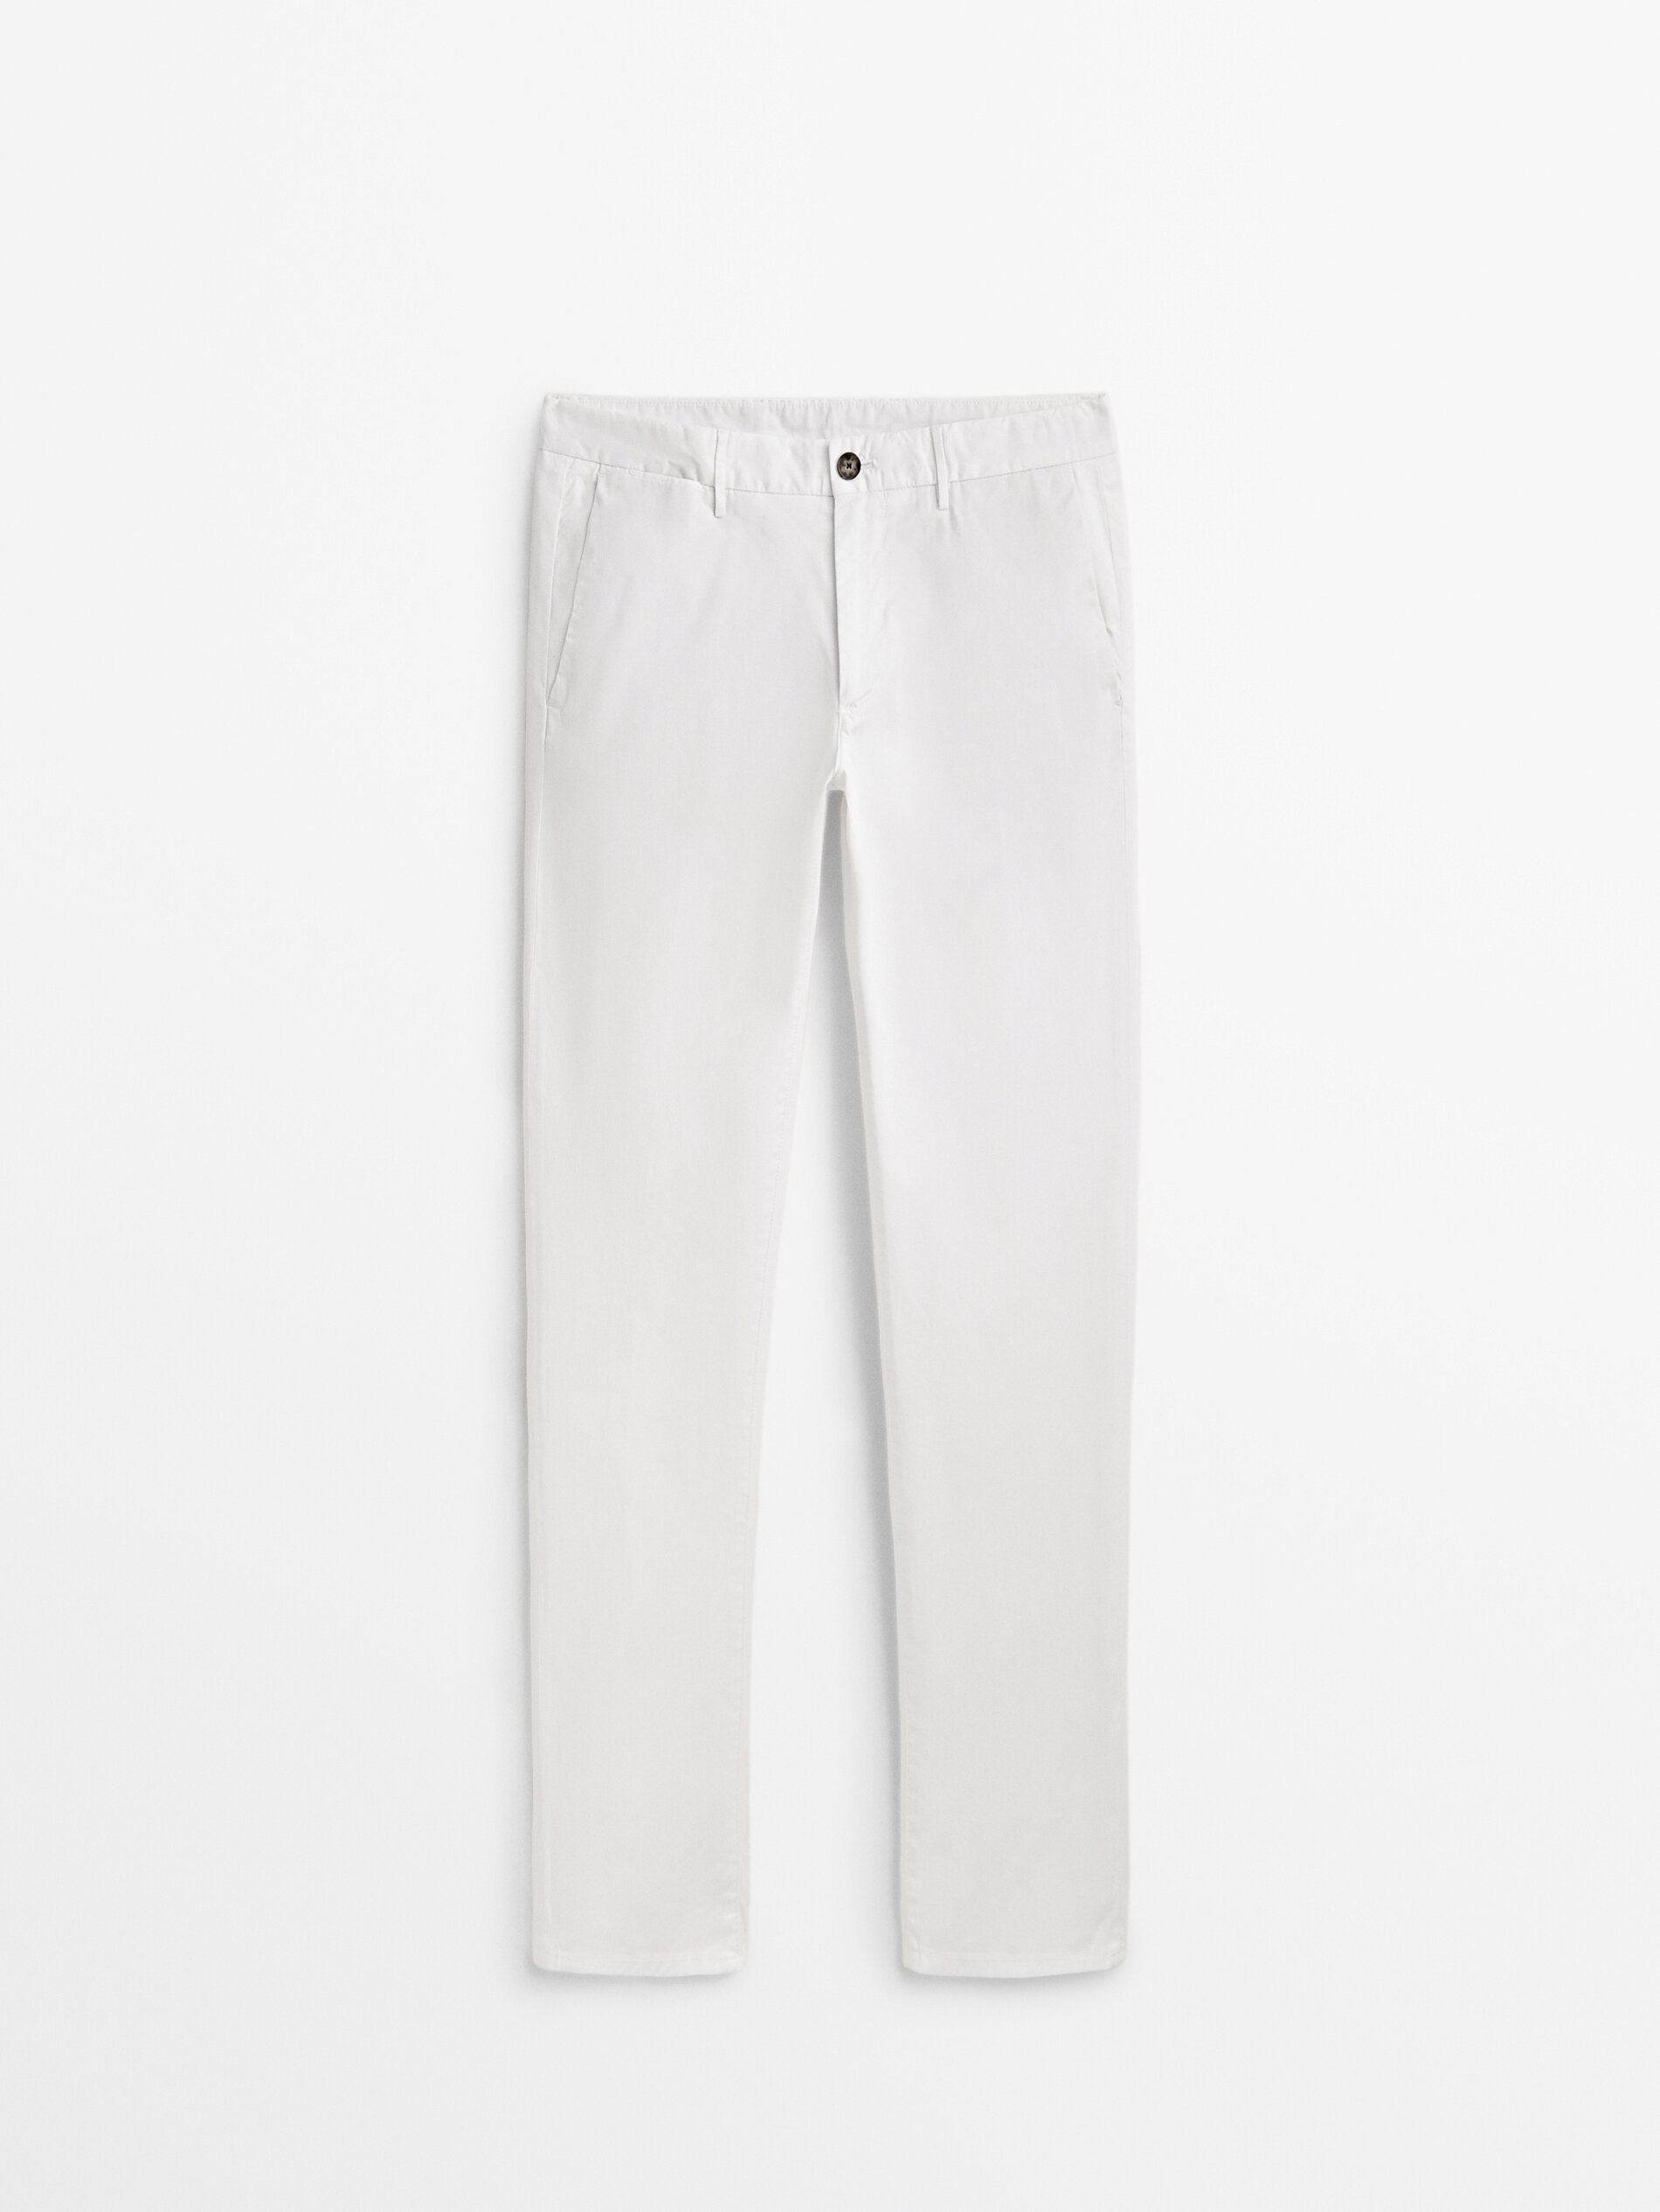 Chinos  Cotton Pants  Silver